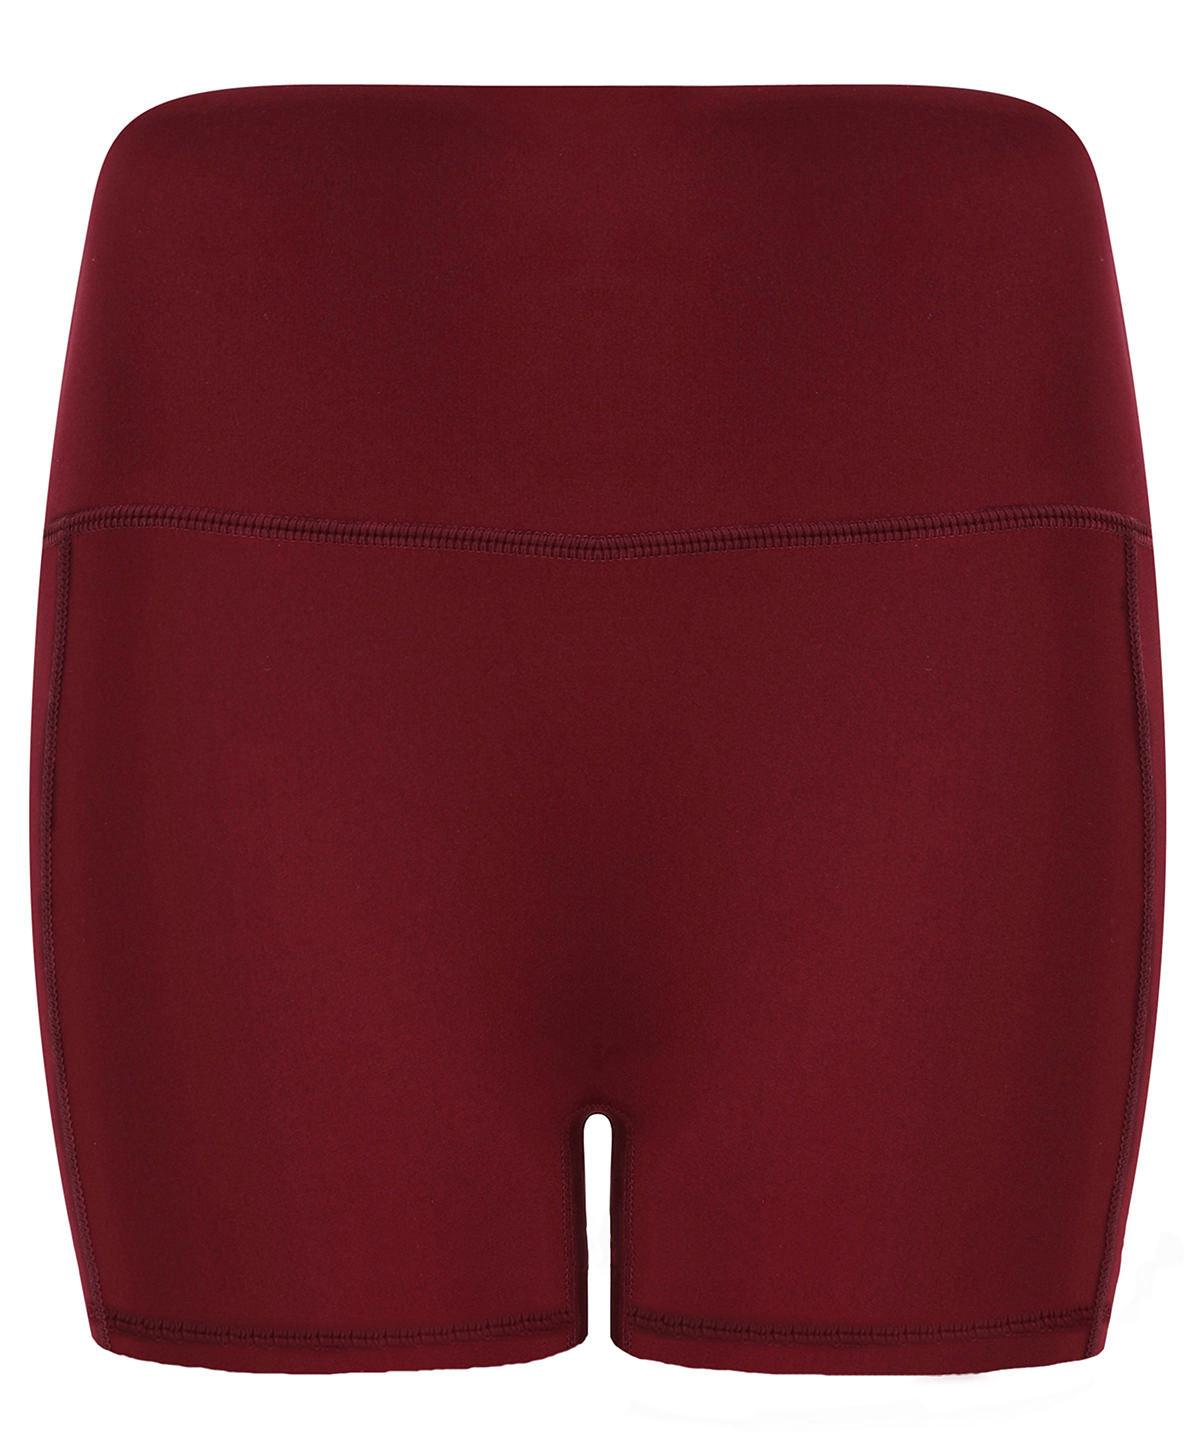 Deep Burgundy - Pocket shorts Shorts Tombo Activewear & Performance, Back to the Gym, New Styles For 2022, On-Trend Activewear, Trousers & Shorts, Women's Fashion Schoolwear Centres